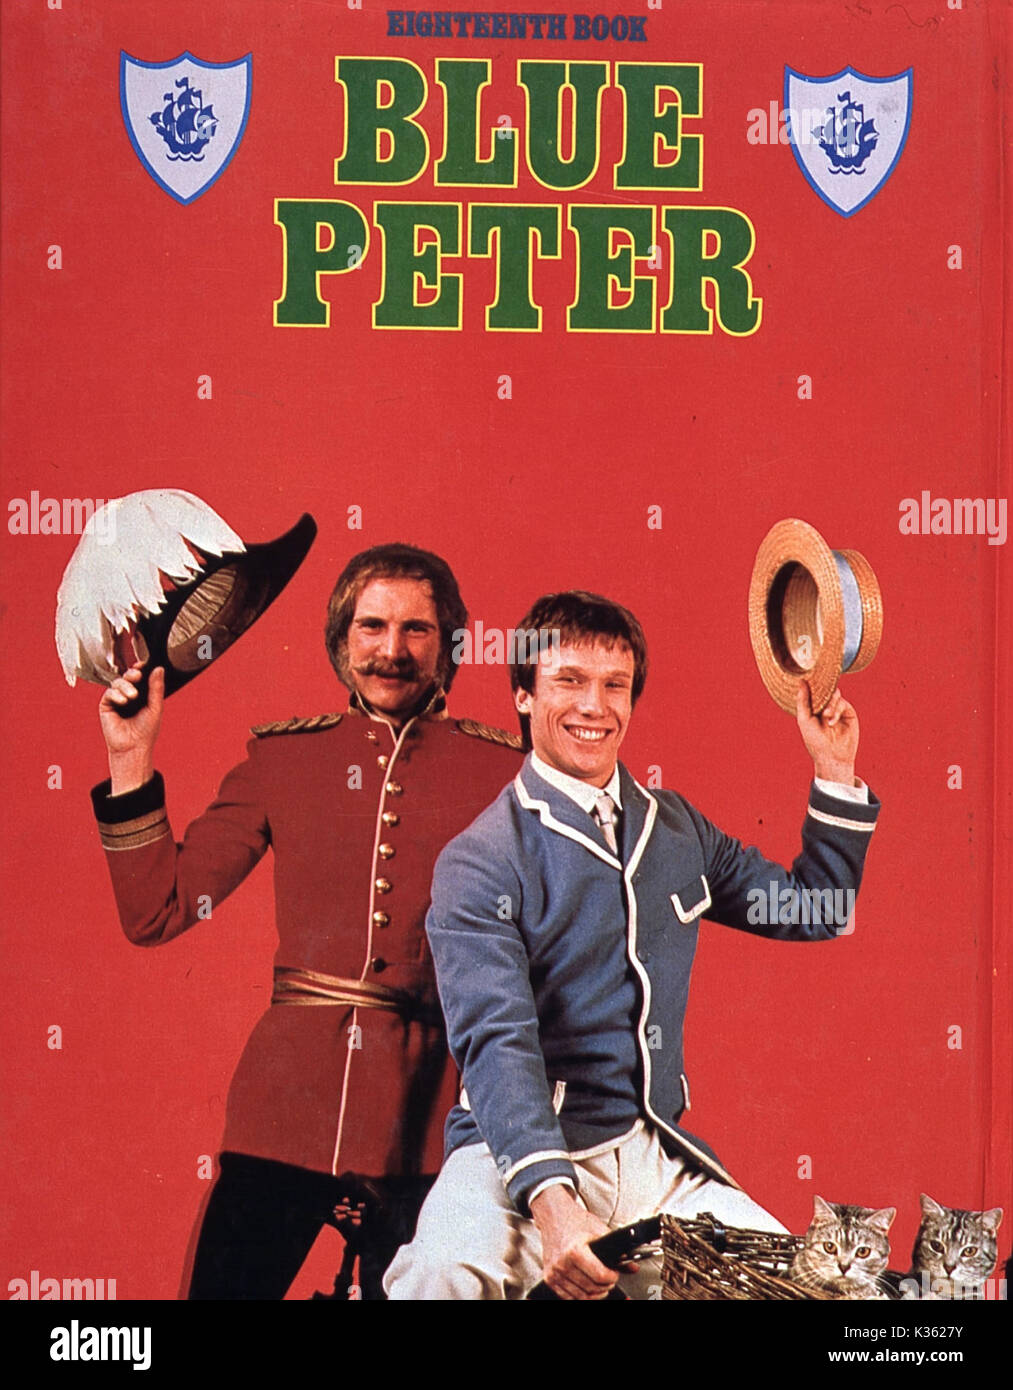 BLUE PETER ANNUAL SIMON GROOM , PETER DUNCAN [1980 - 1984 and 1985 - 1986]     Date: 1981 Stock Photo